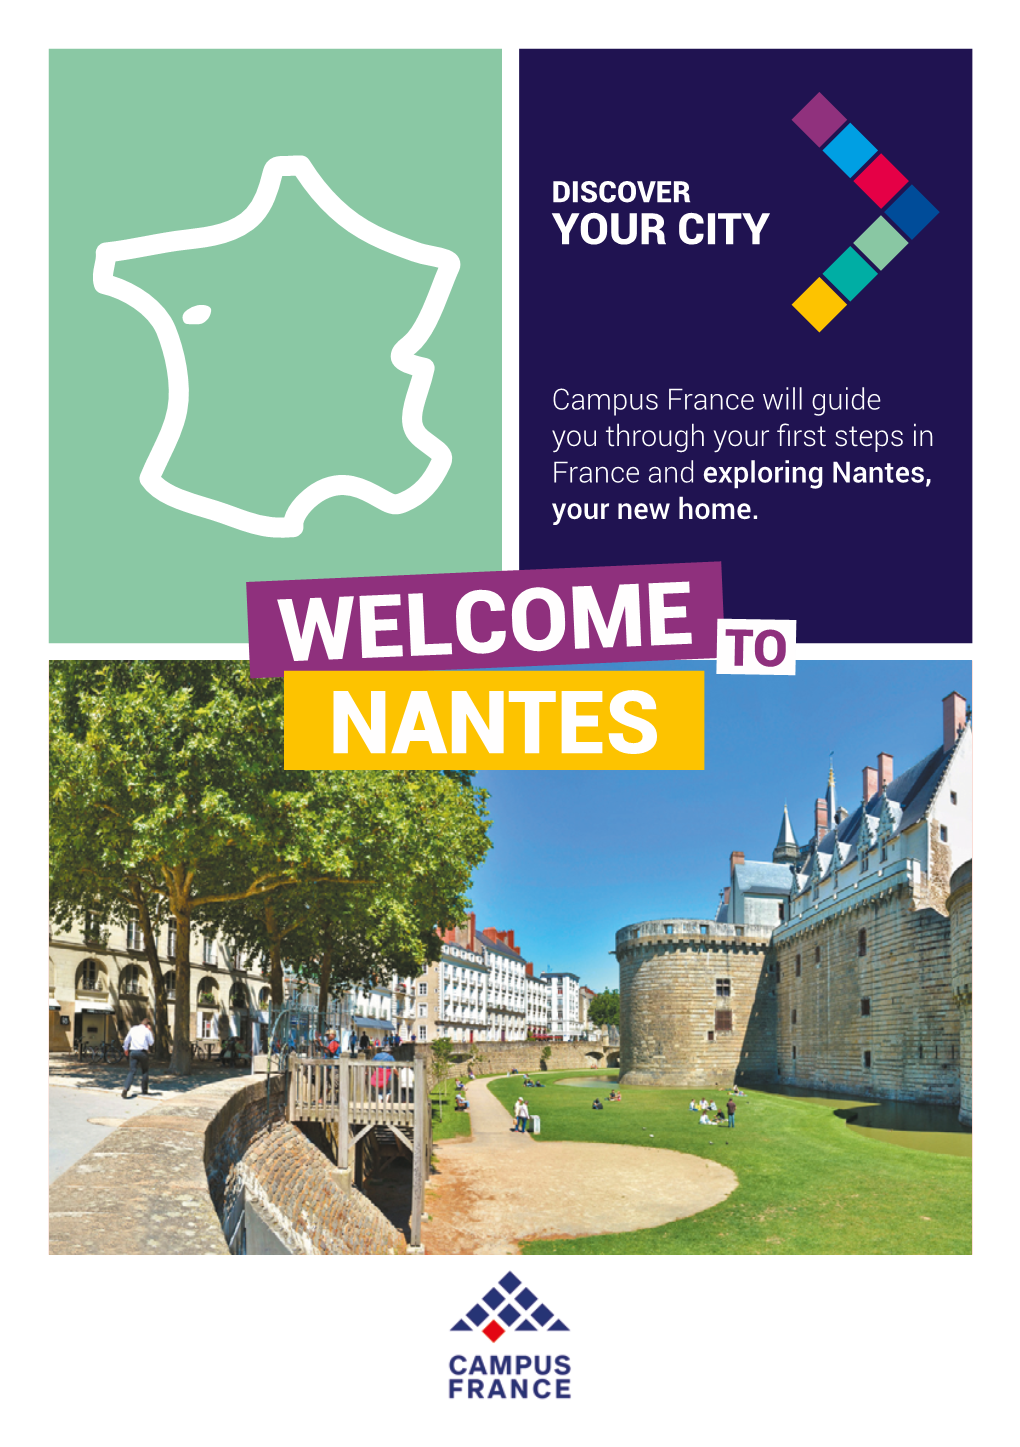 Nantes, Your New Home